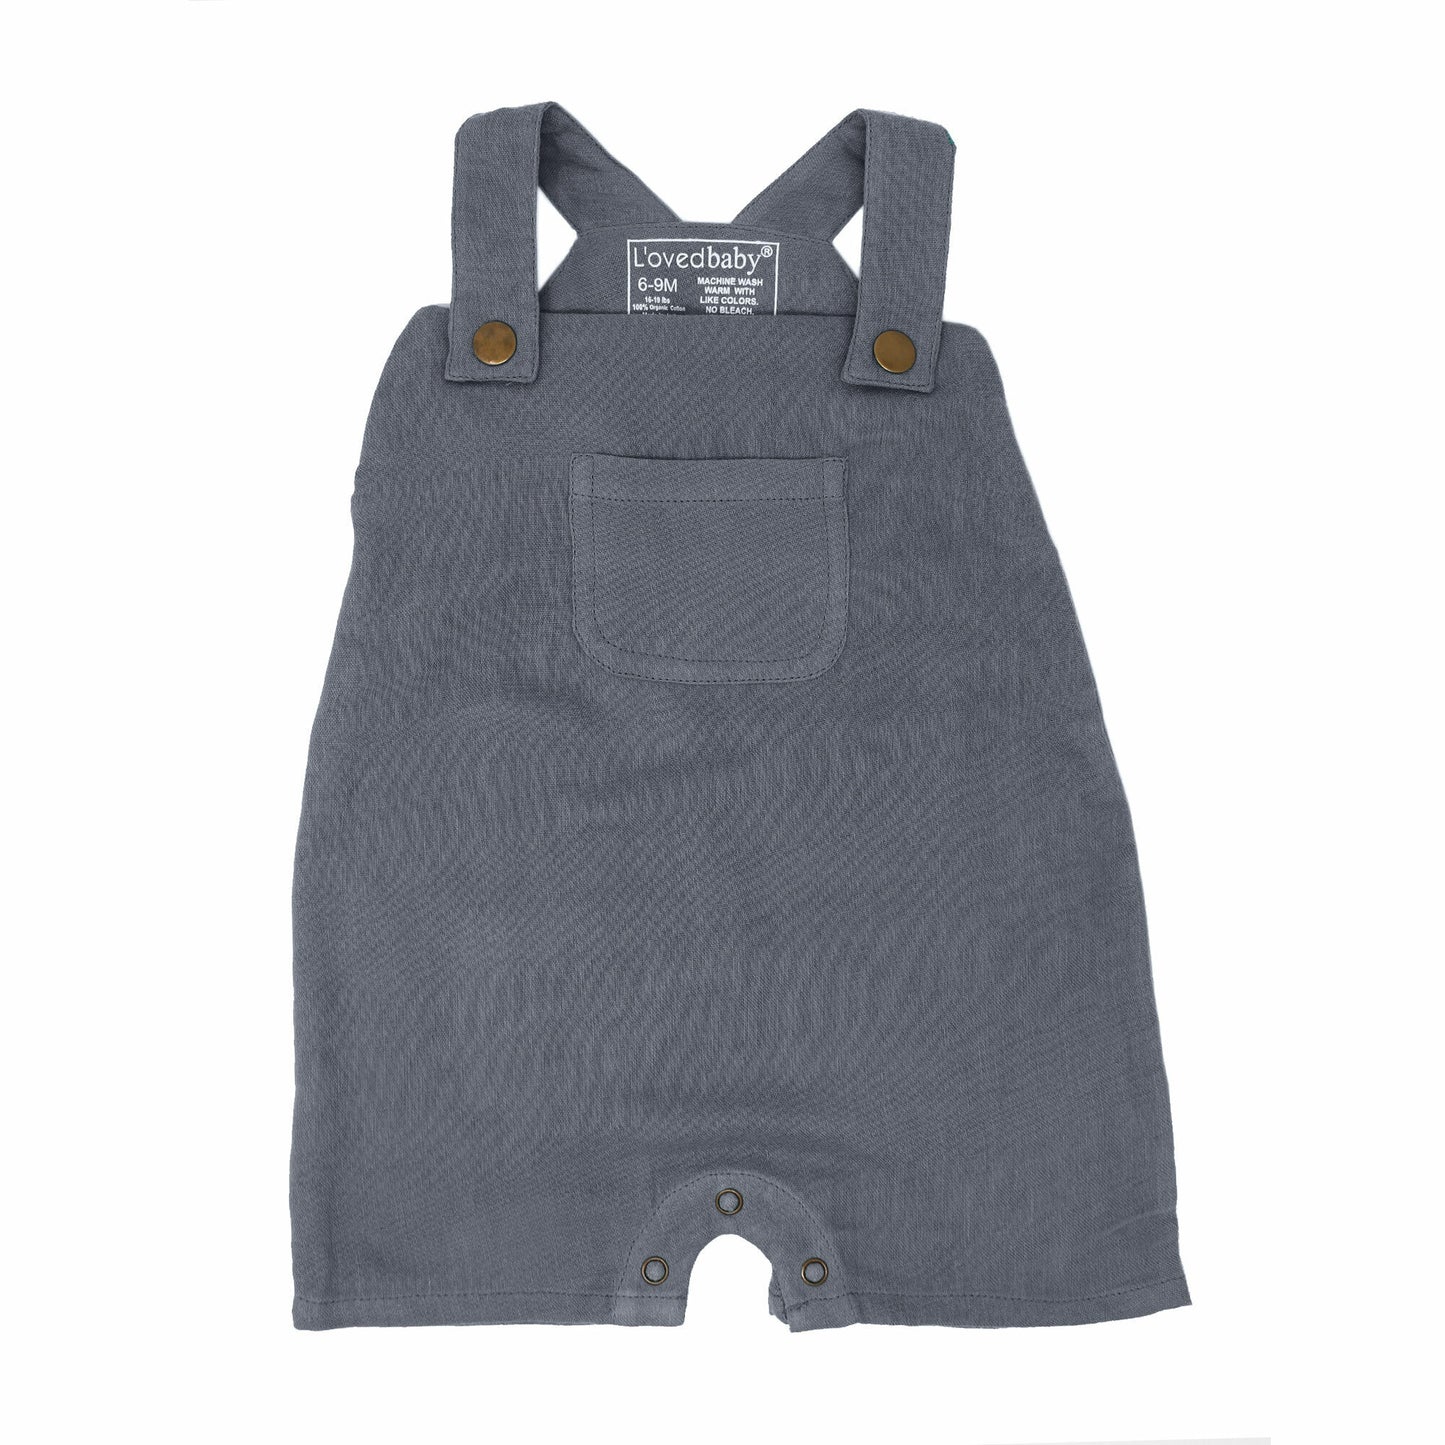 L'oved Baby Muslin Overalls